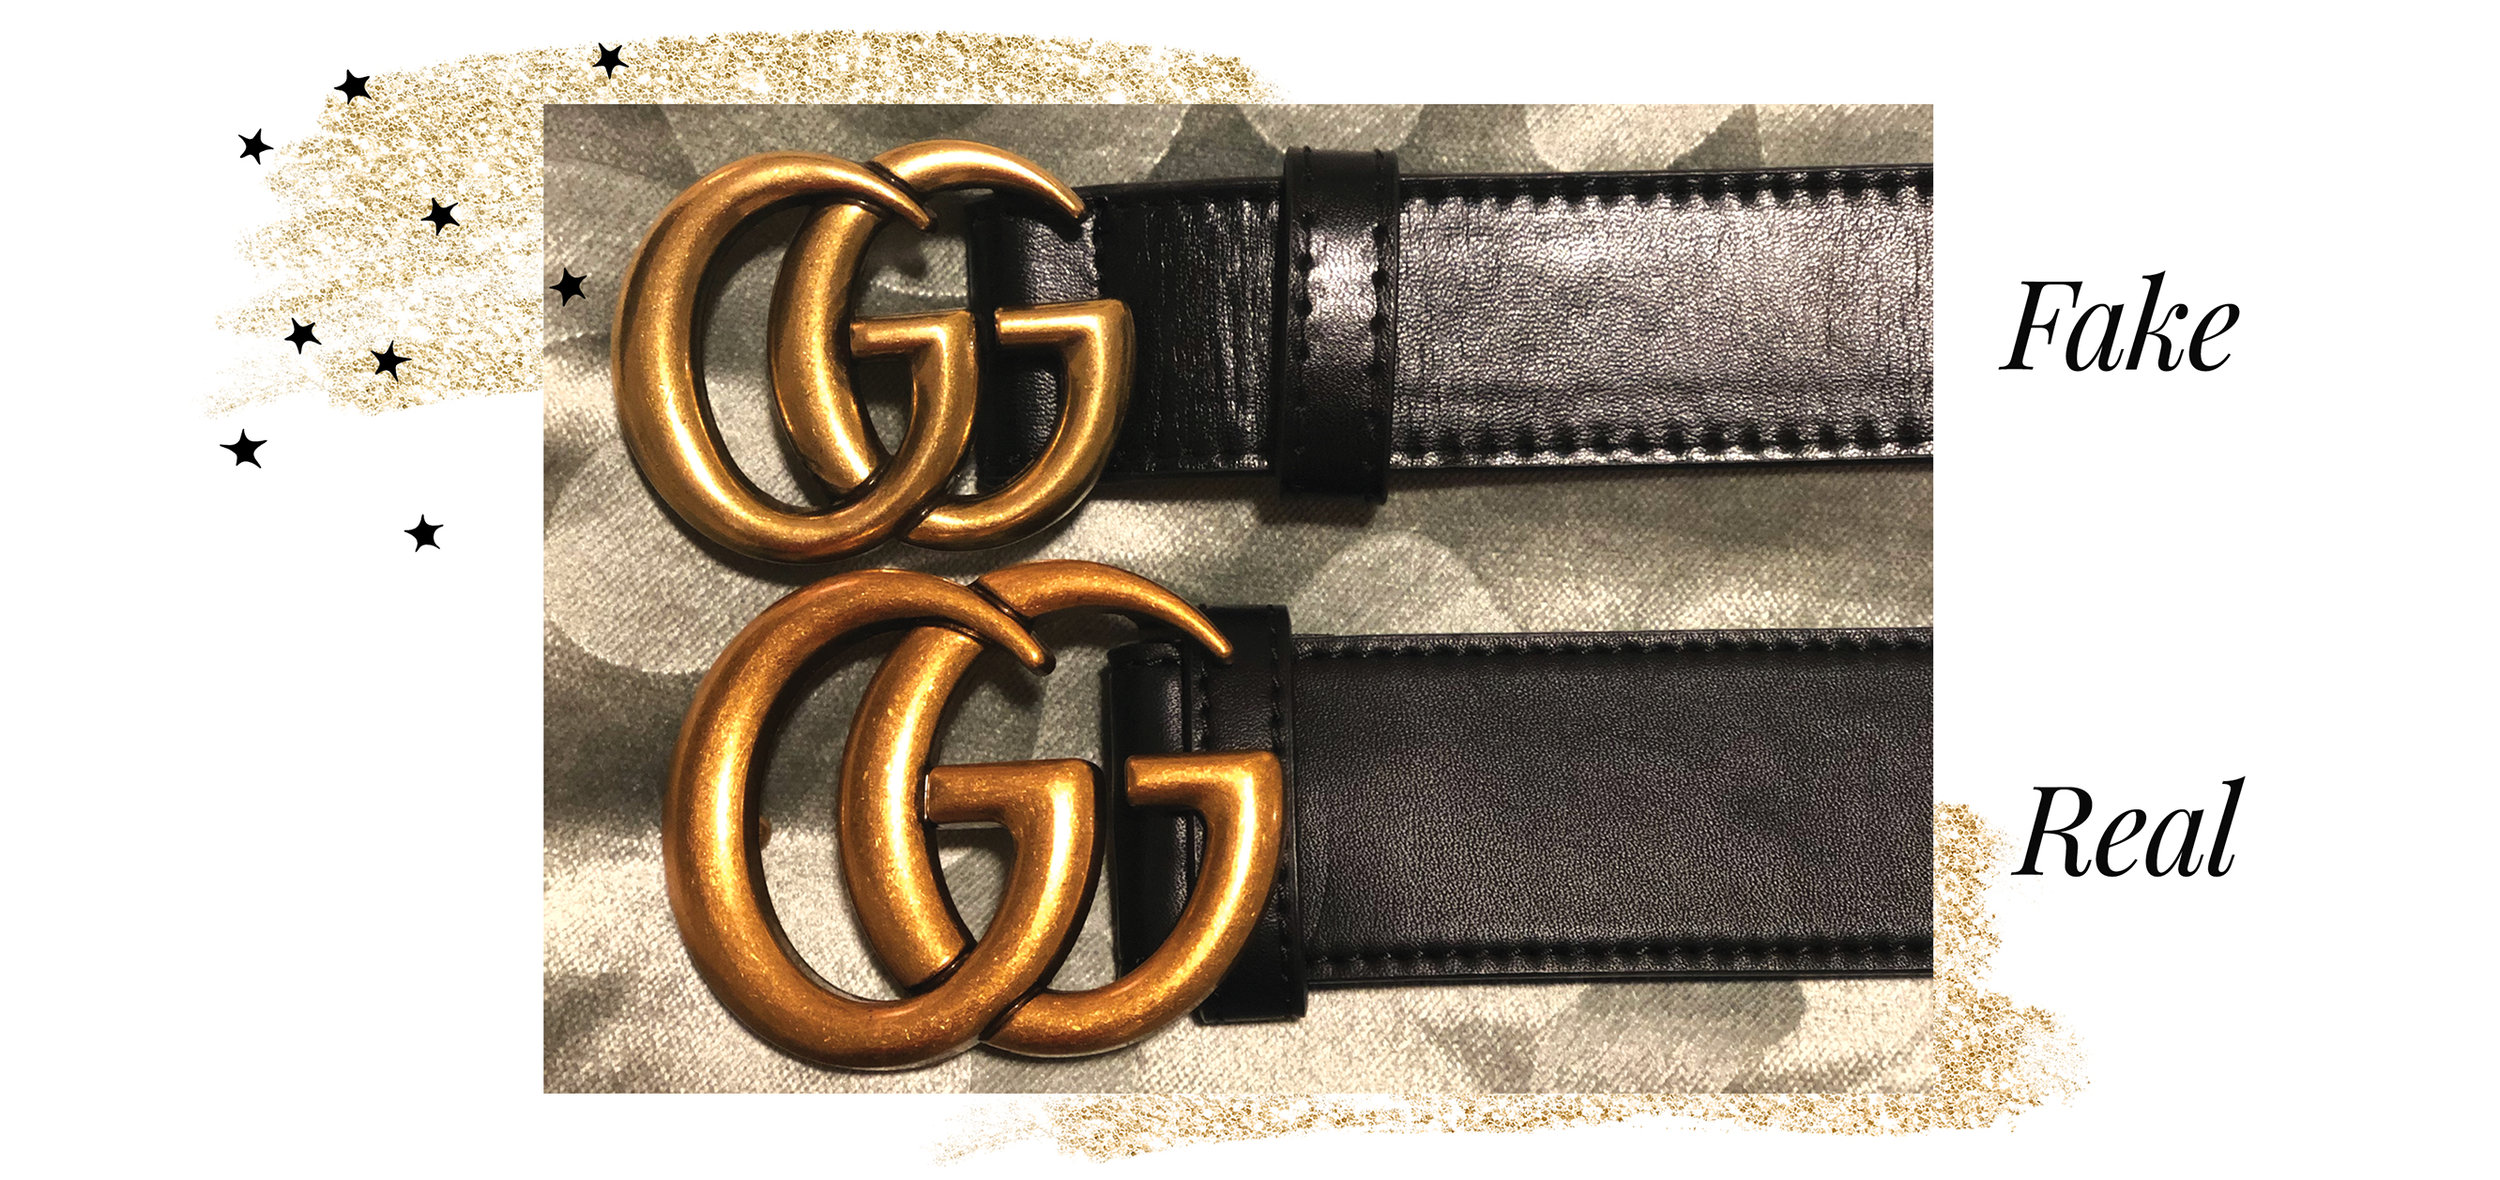 foretage lade masser The Difference Between Real and Fake Gucci Belts — A Little Bit of Fringe